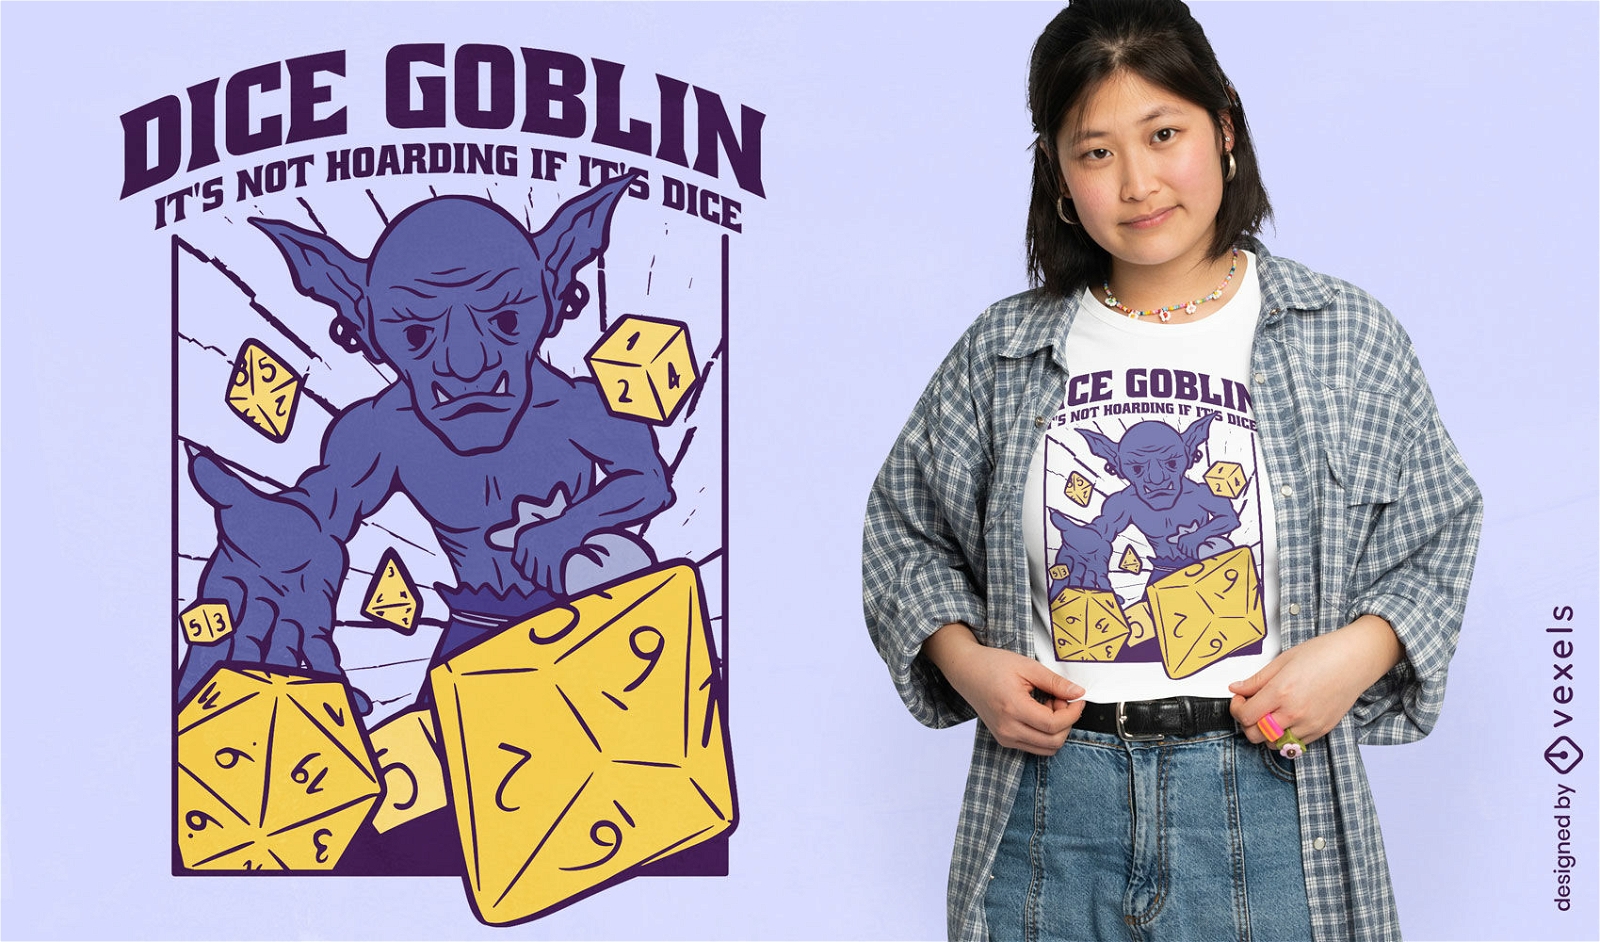 Gobling throwing dices t-shirt design